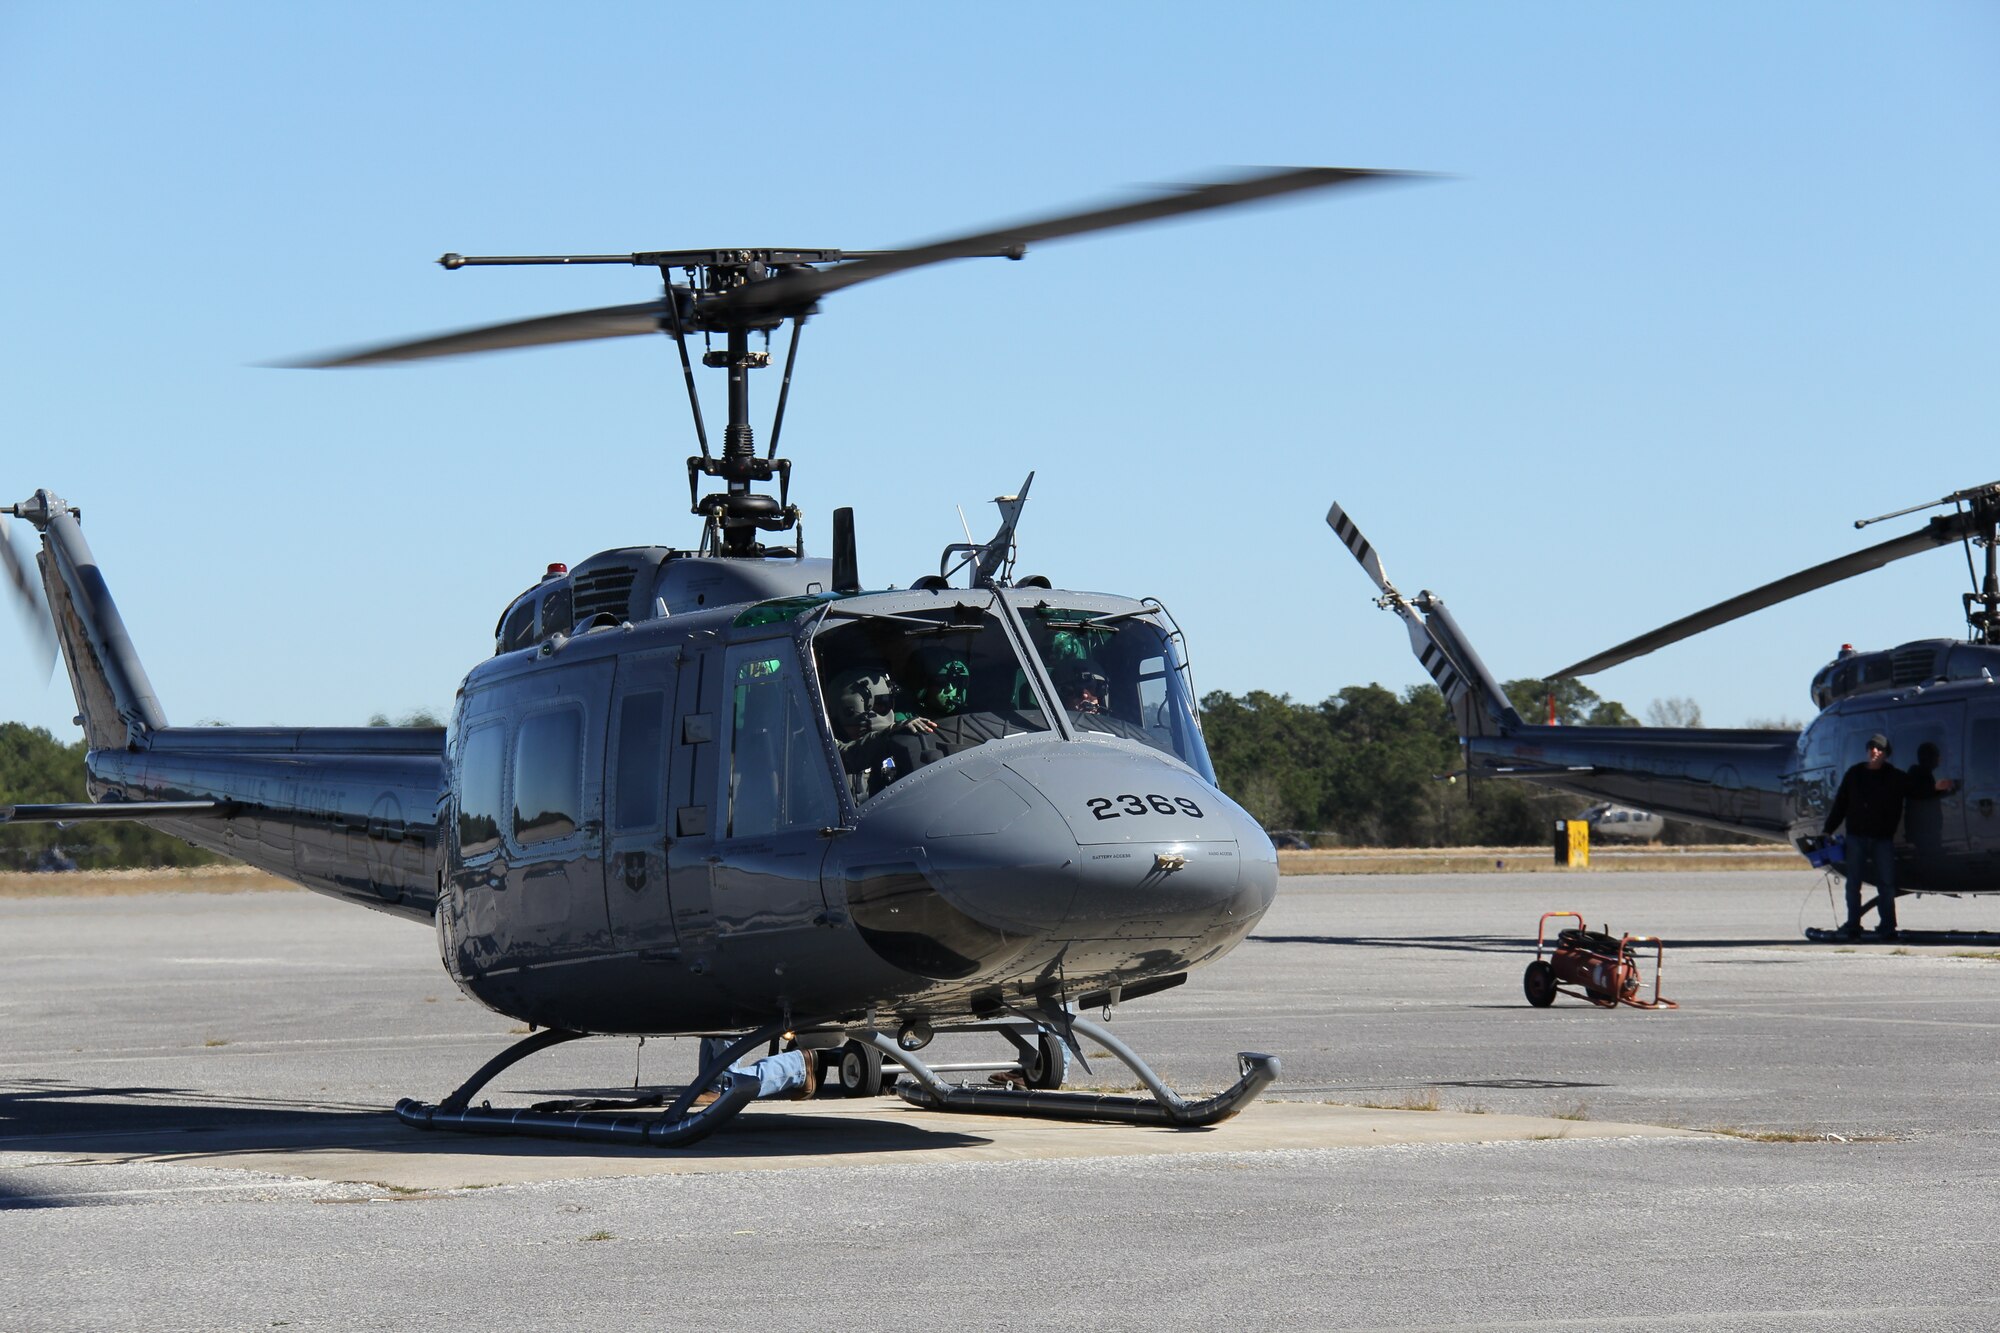 Air Force Lt. Gen. Marshall B. “Brad” Webb, commander of Air Education and Training Command, Capt. Austin Kong, 23rd FTS instructor pilot, and Technical Sgt. Jared Reynolds, 23rd FTS special missions aviator instructor, head out on an orientation flight in a TH-1H Huey at Fort Rucker, Ala., Jan. 11.